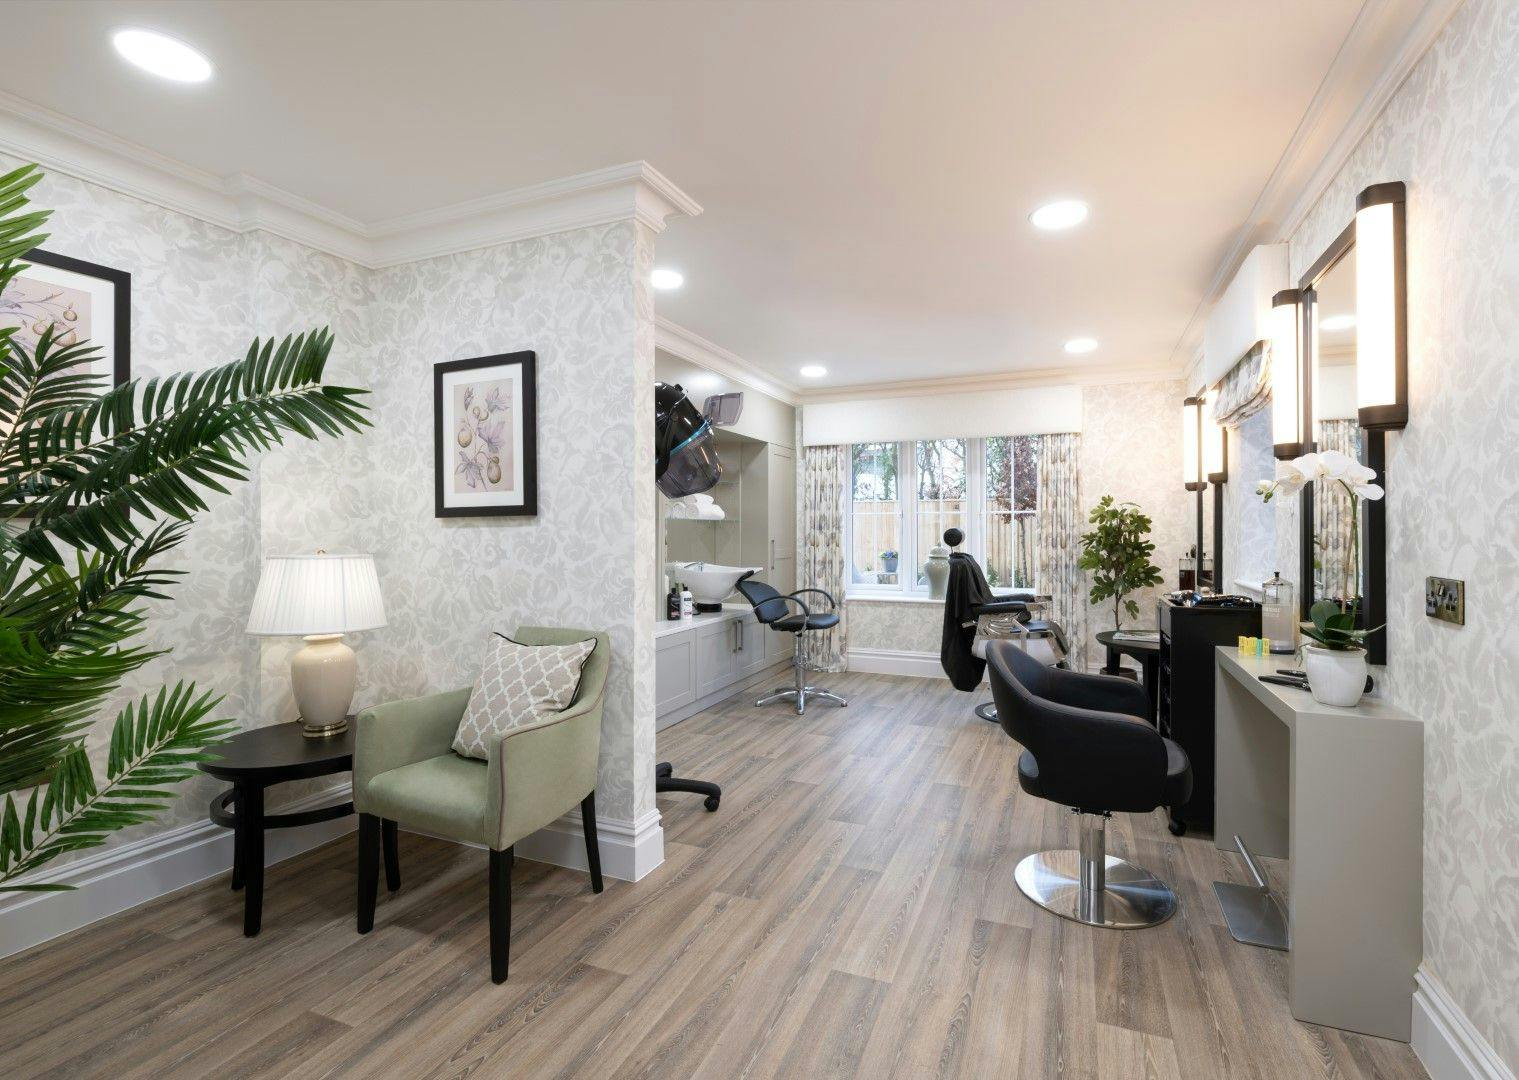 Salon at Henley Manor Care Home in Henley-on-Thames, South Oxfordshire